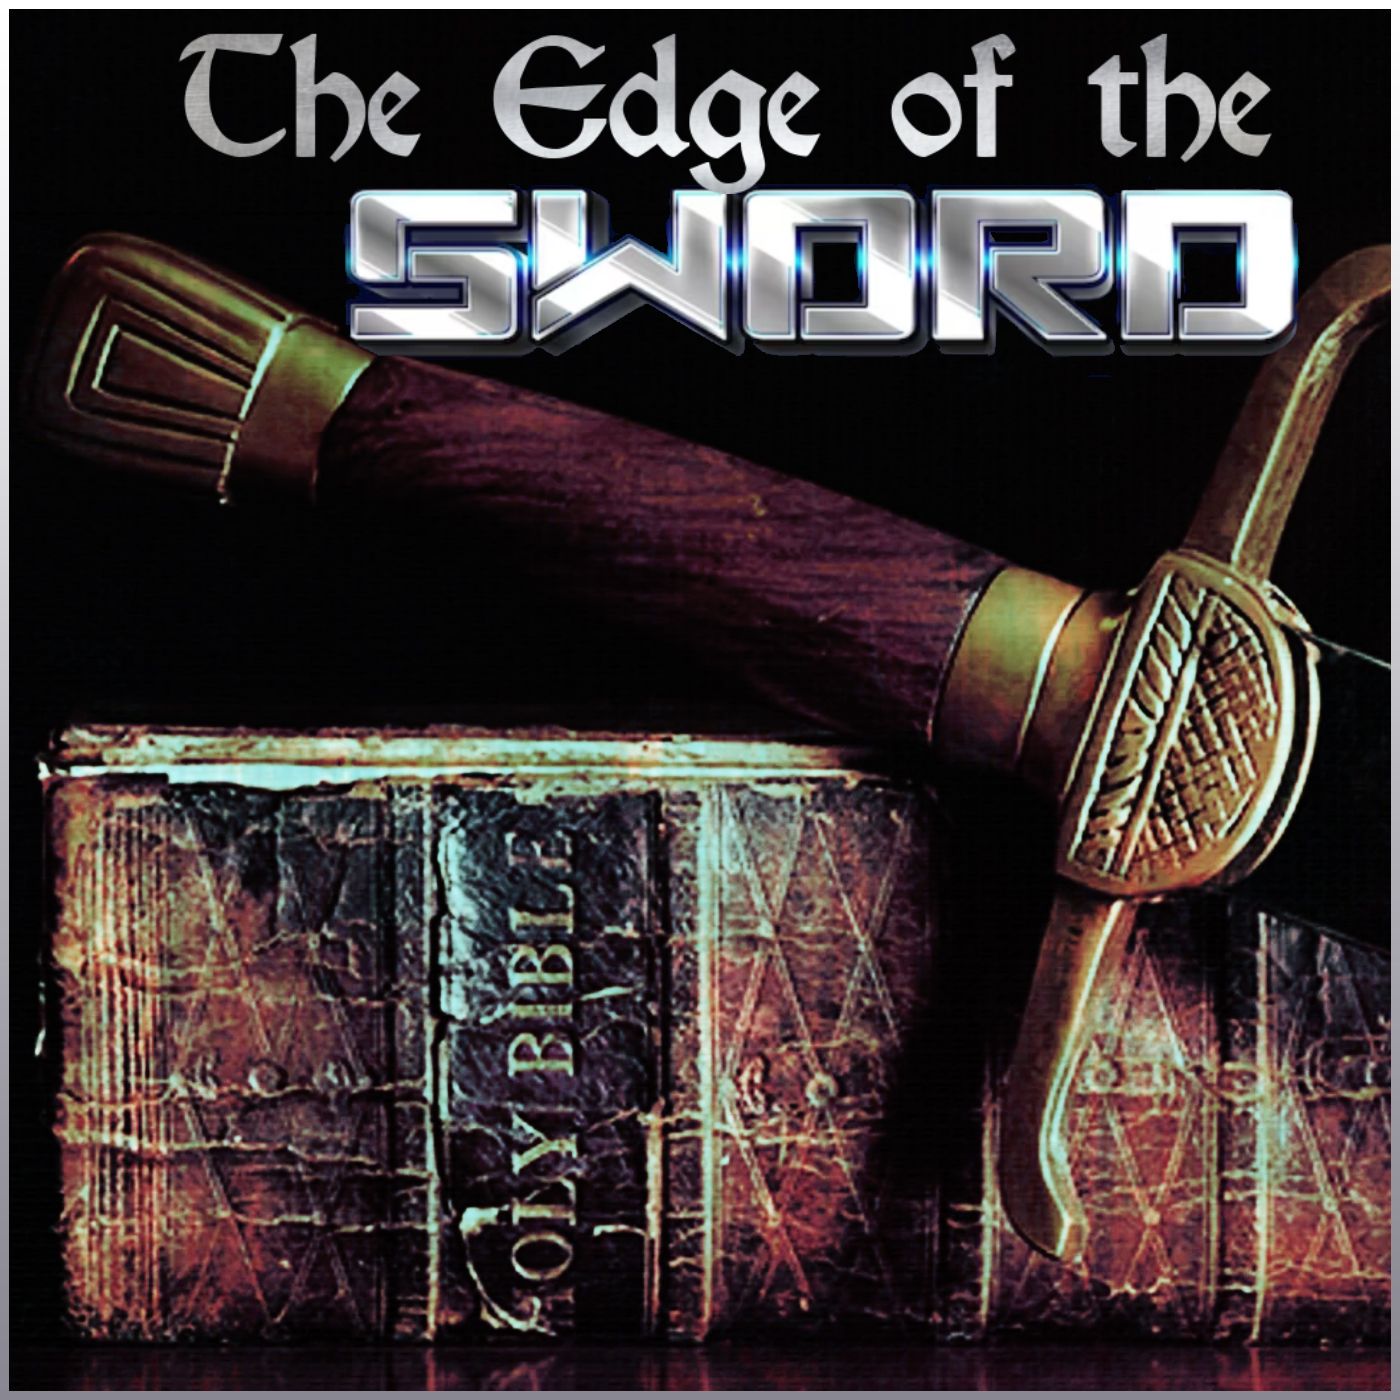 The Edge of the Sword: Exploits of a Bad (Bad!) God